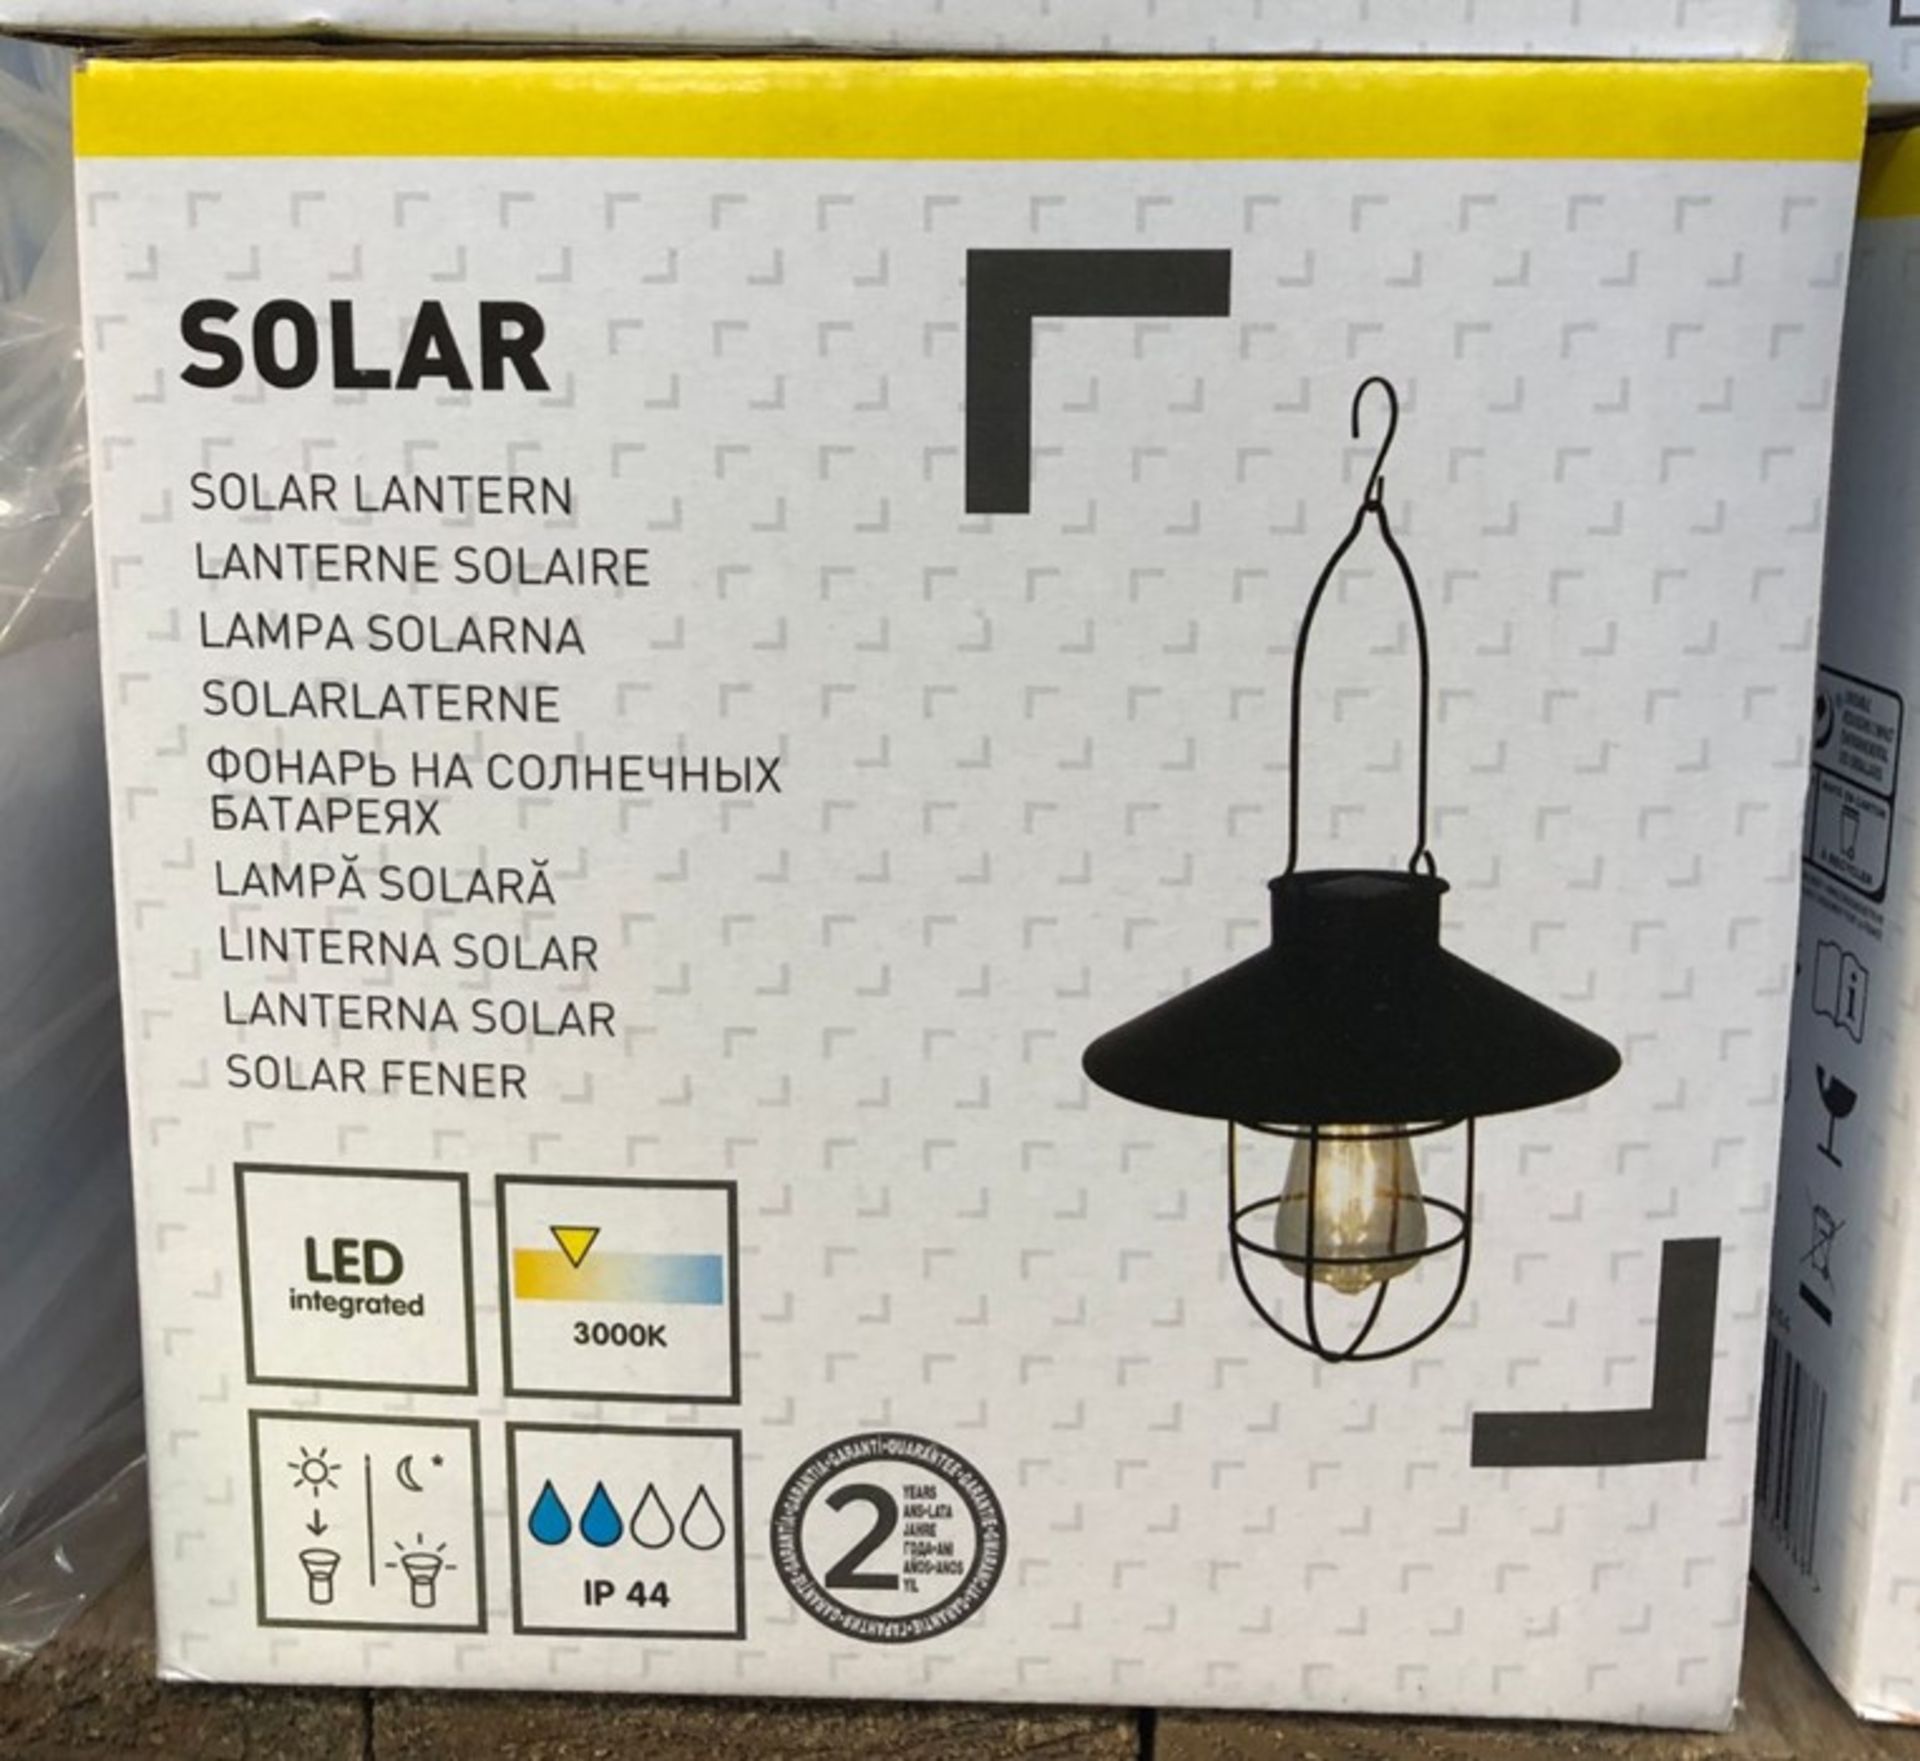 8 X BLACK SOLAR-POWERED LED OUTDOOR LANTERNS / COMBINED RRP £80.00 / MIXED GRADE, MOST ITEMS